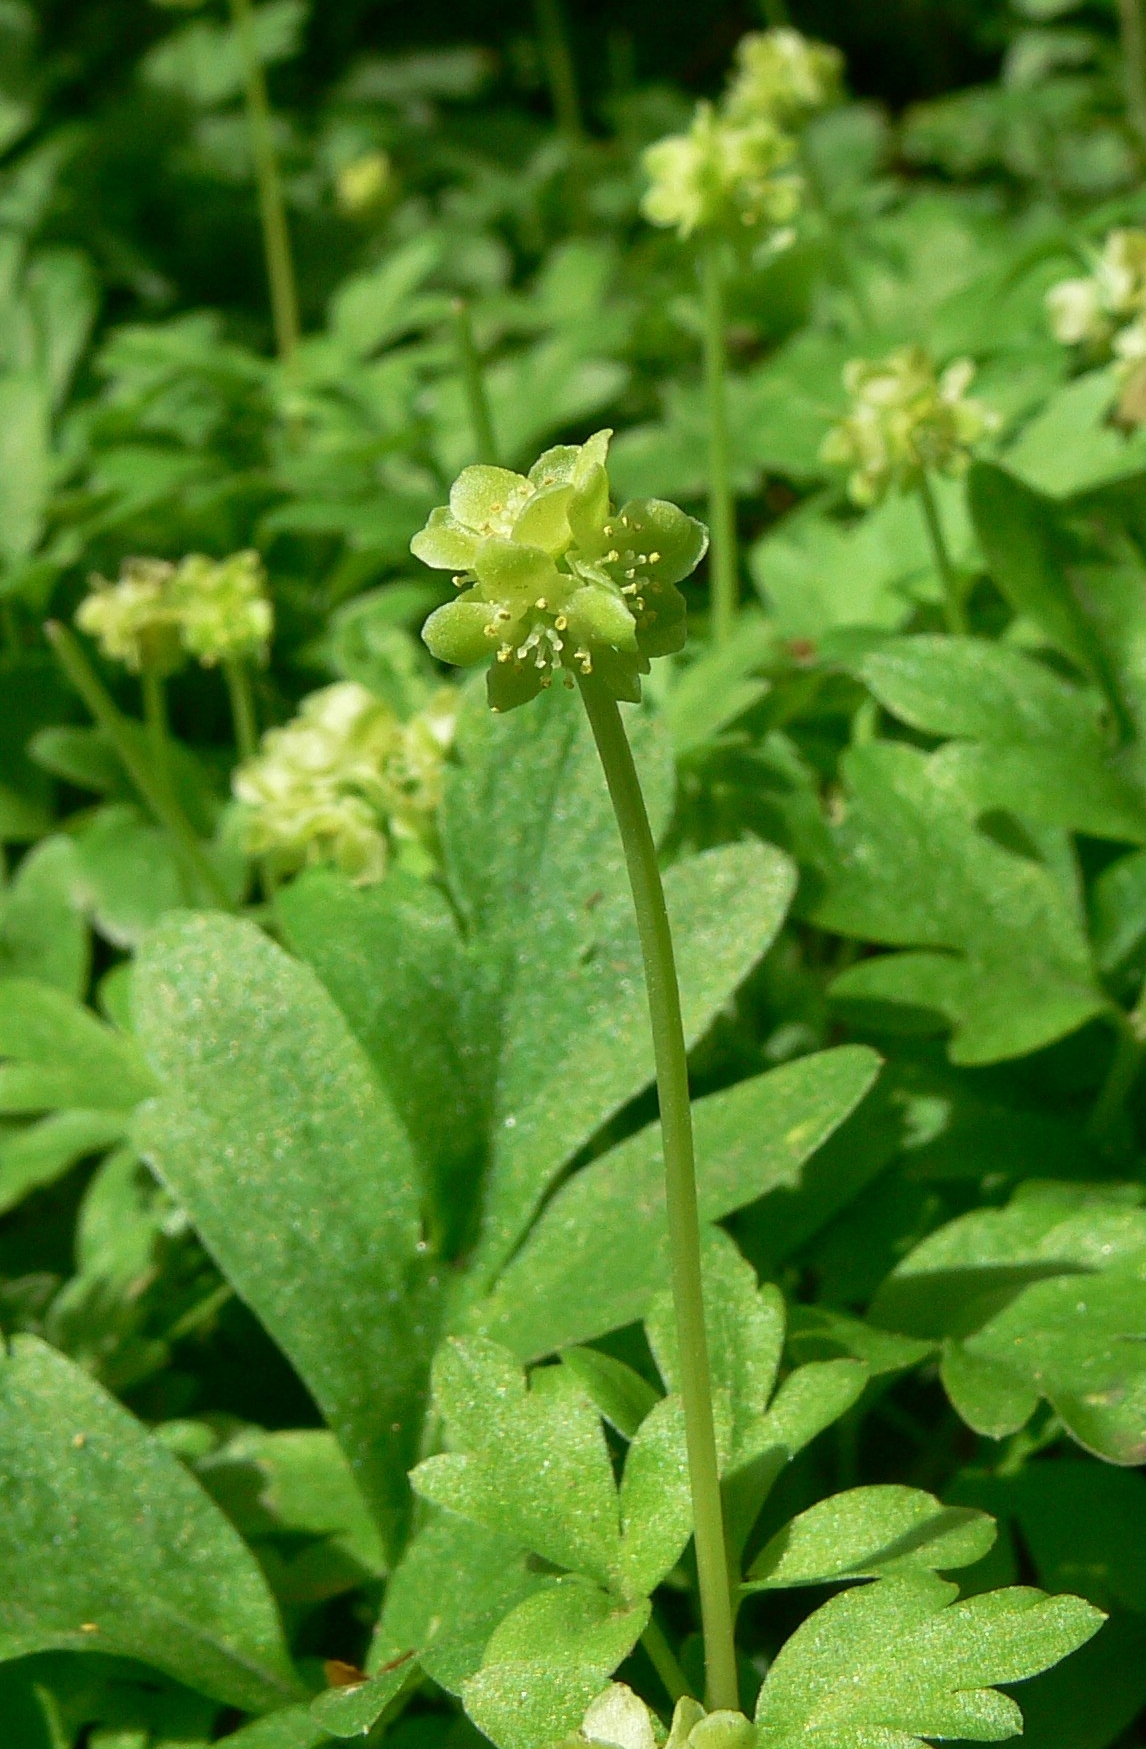 Moschatel gets its common name of "Town Hall Clock" from its flowers that are arranged in a square with a fifth on the top.